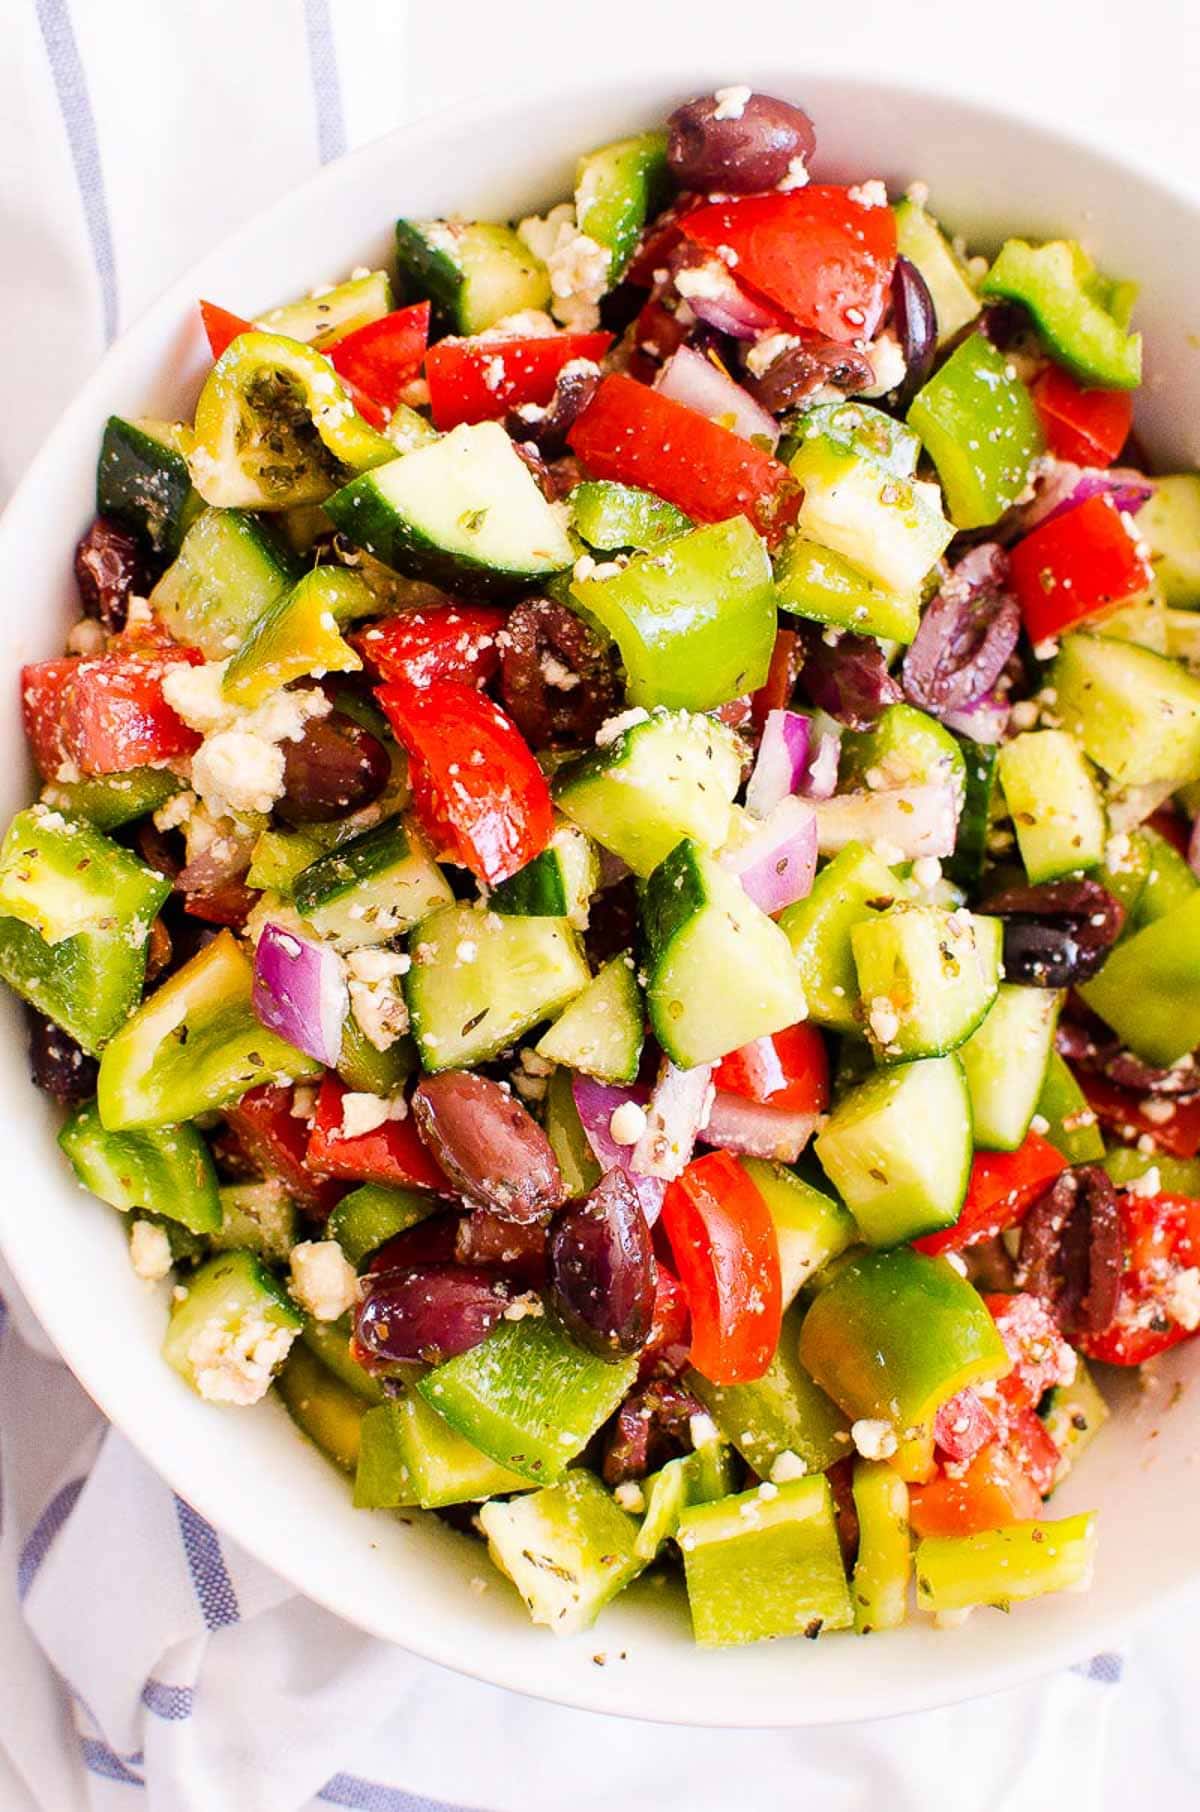 Traditional Greek salad with tomato cucumber, feta, peppers and olives in white bow.